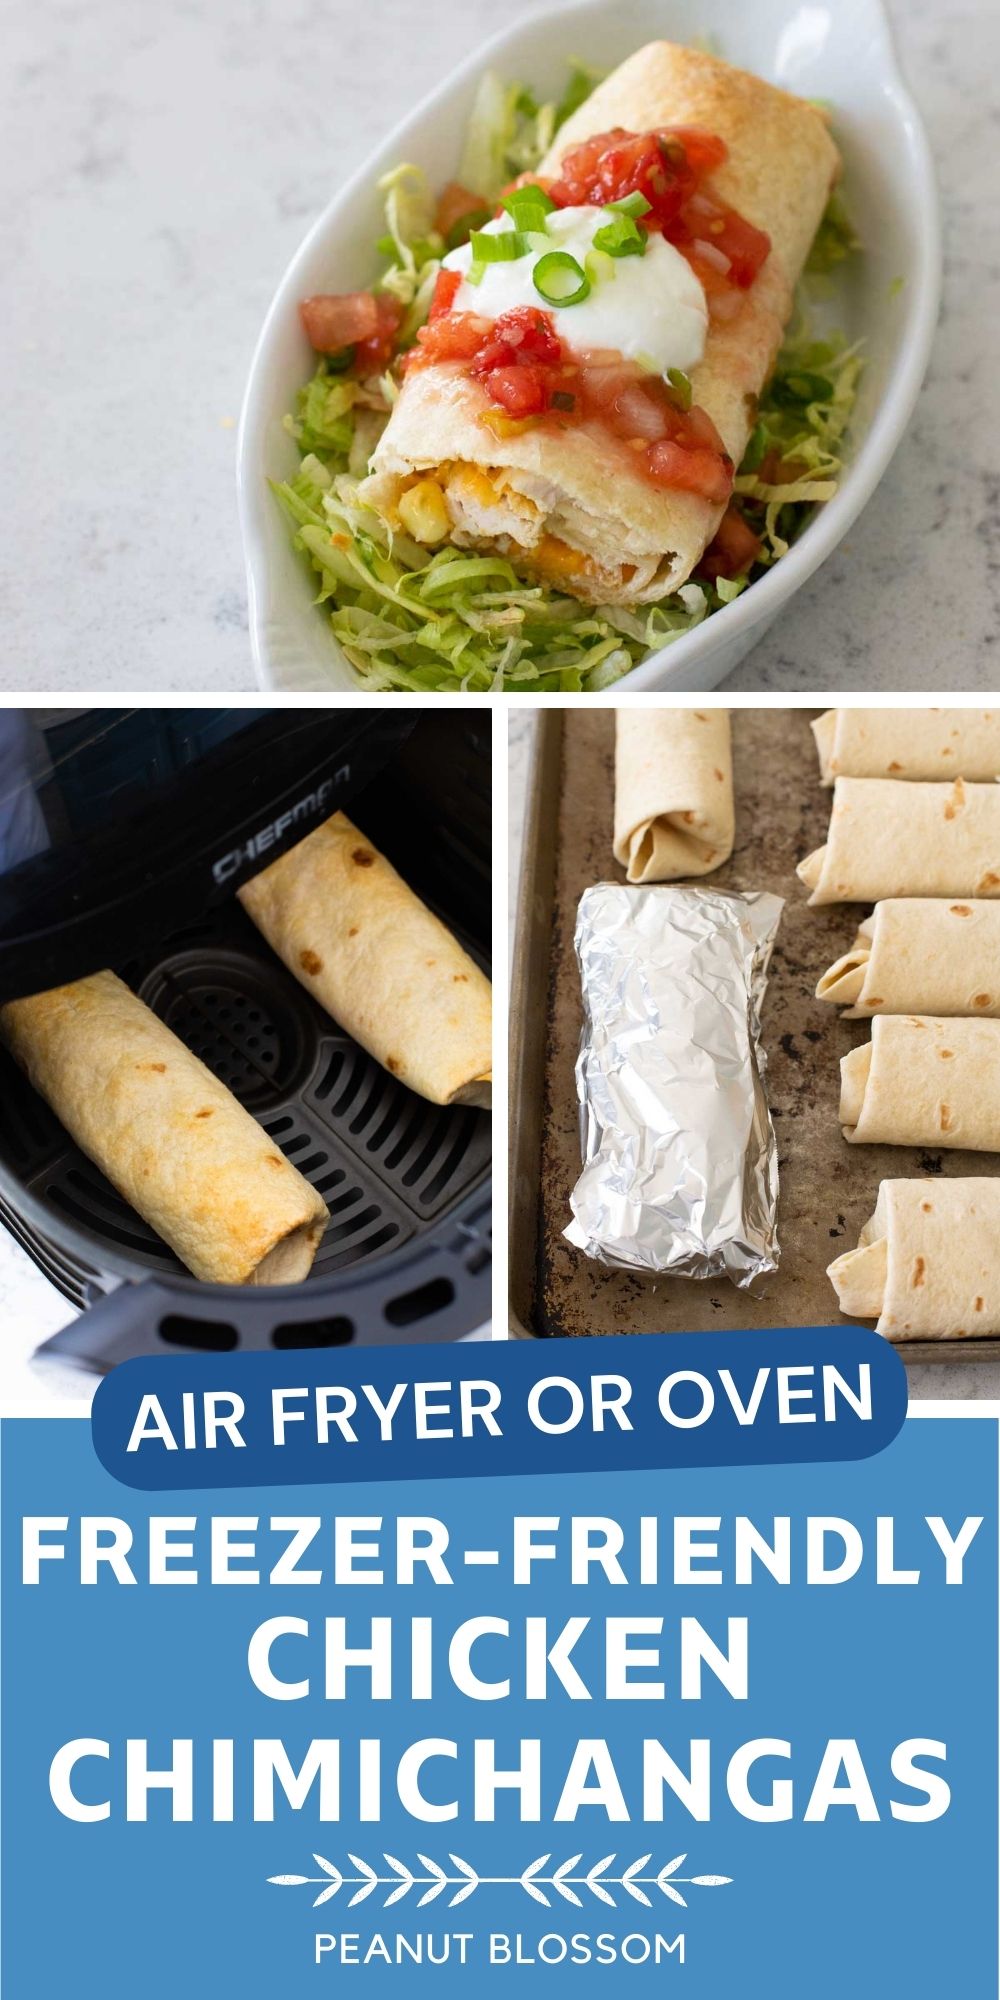 The chicken chimichanga is served on lettuce. Another photo shows it baking in the air fryer, another photo shows it wrapped in foil for the freezer.